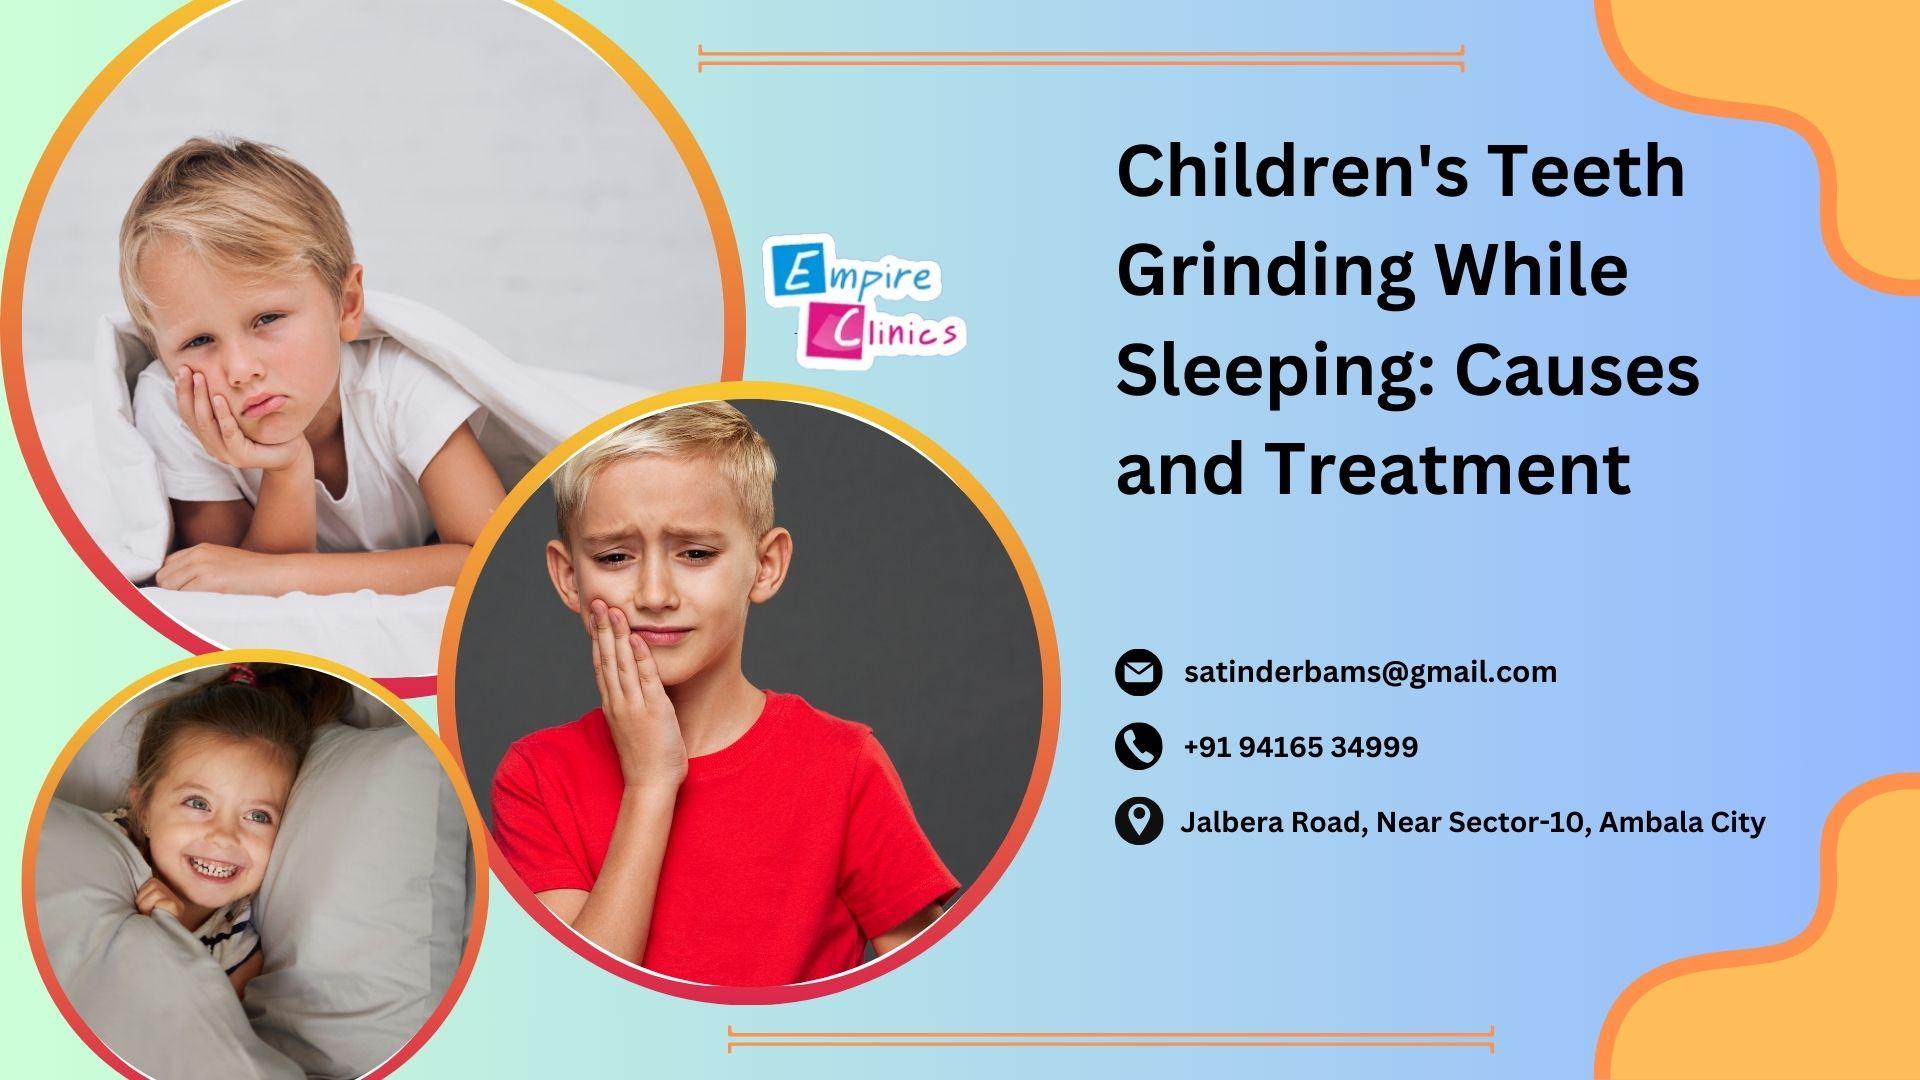 Children’s Teeth Grinding While Sleeping: Causes and Treatment